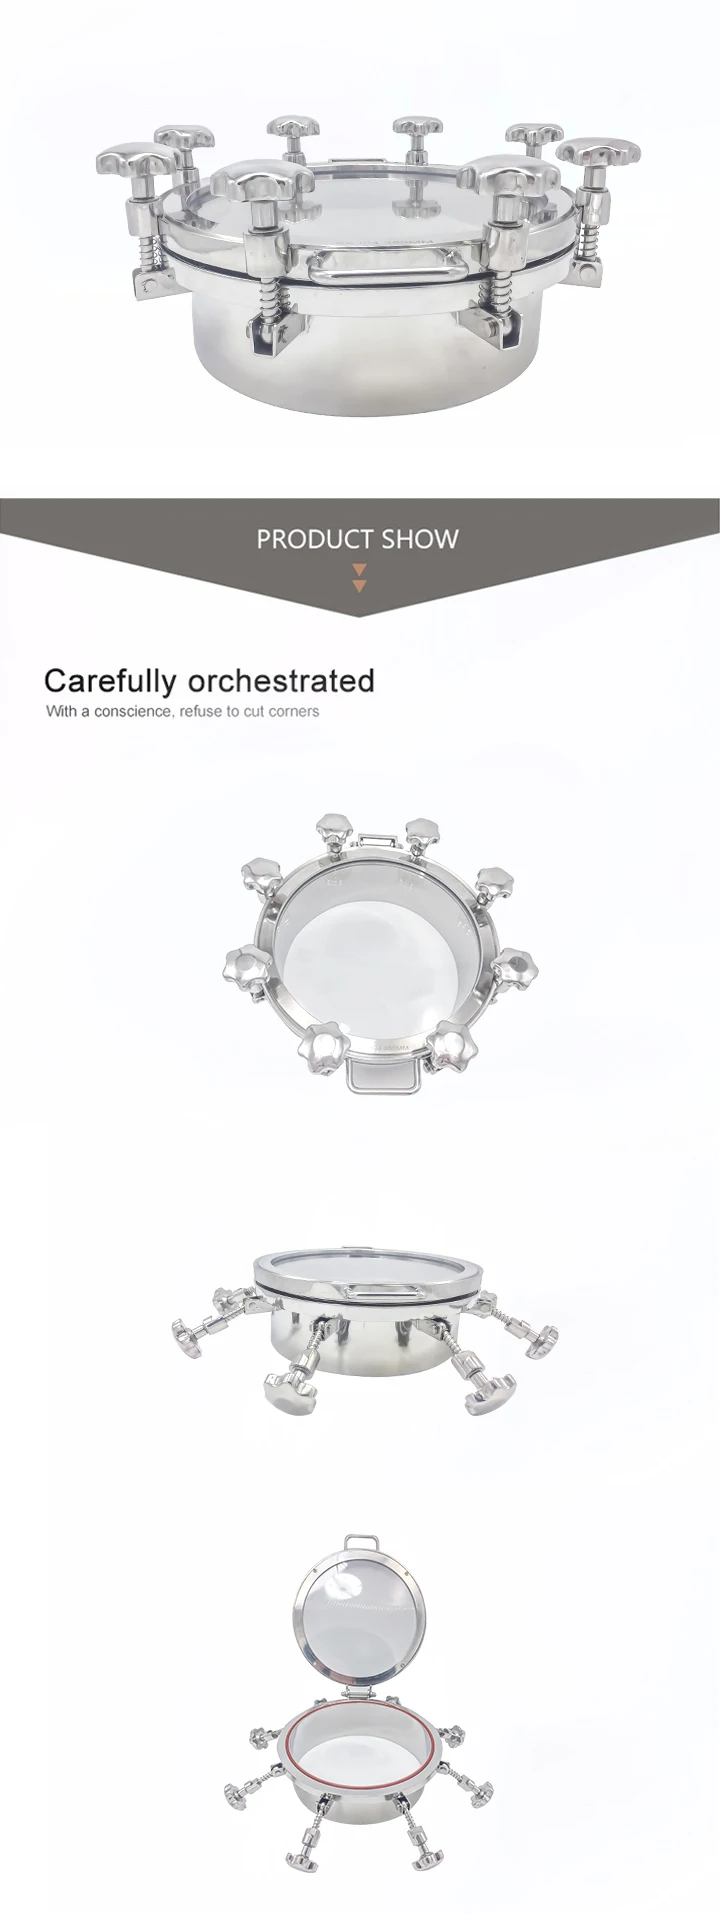 304 food beverage stainless steel manhole cover chemical sanitary man hole with sight glass